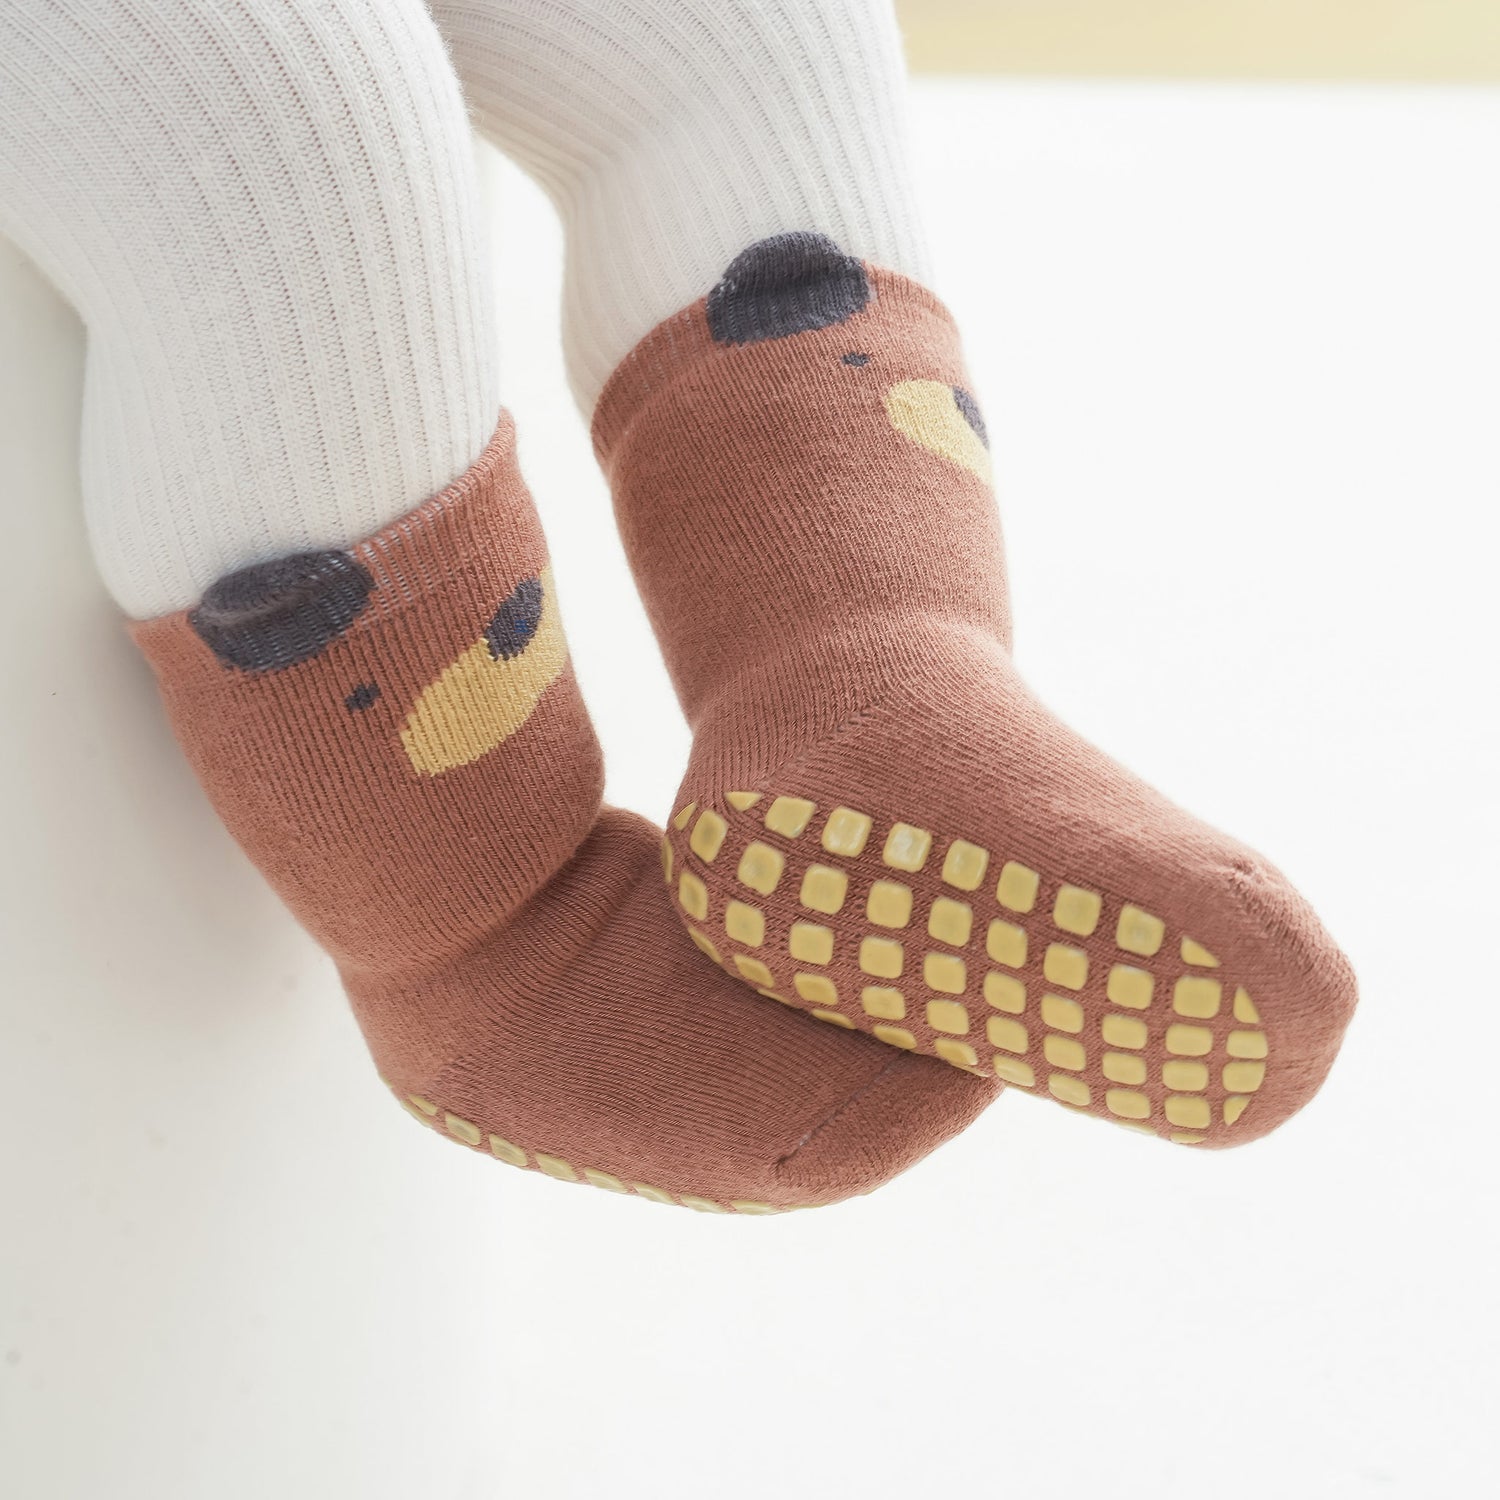 Hassle-free designed socks that stay on babies.